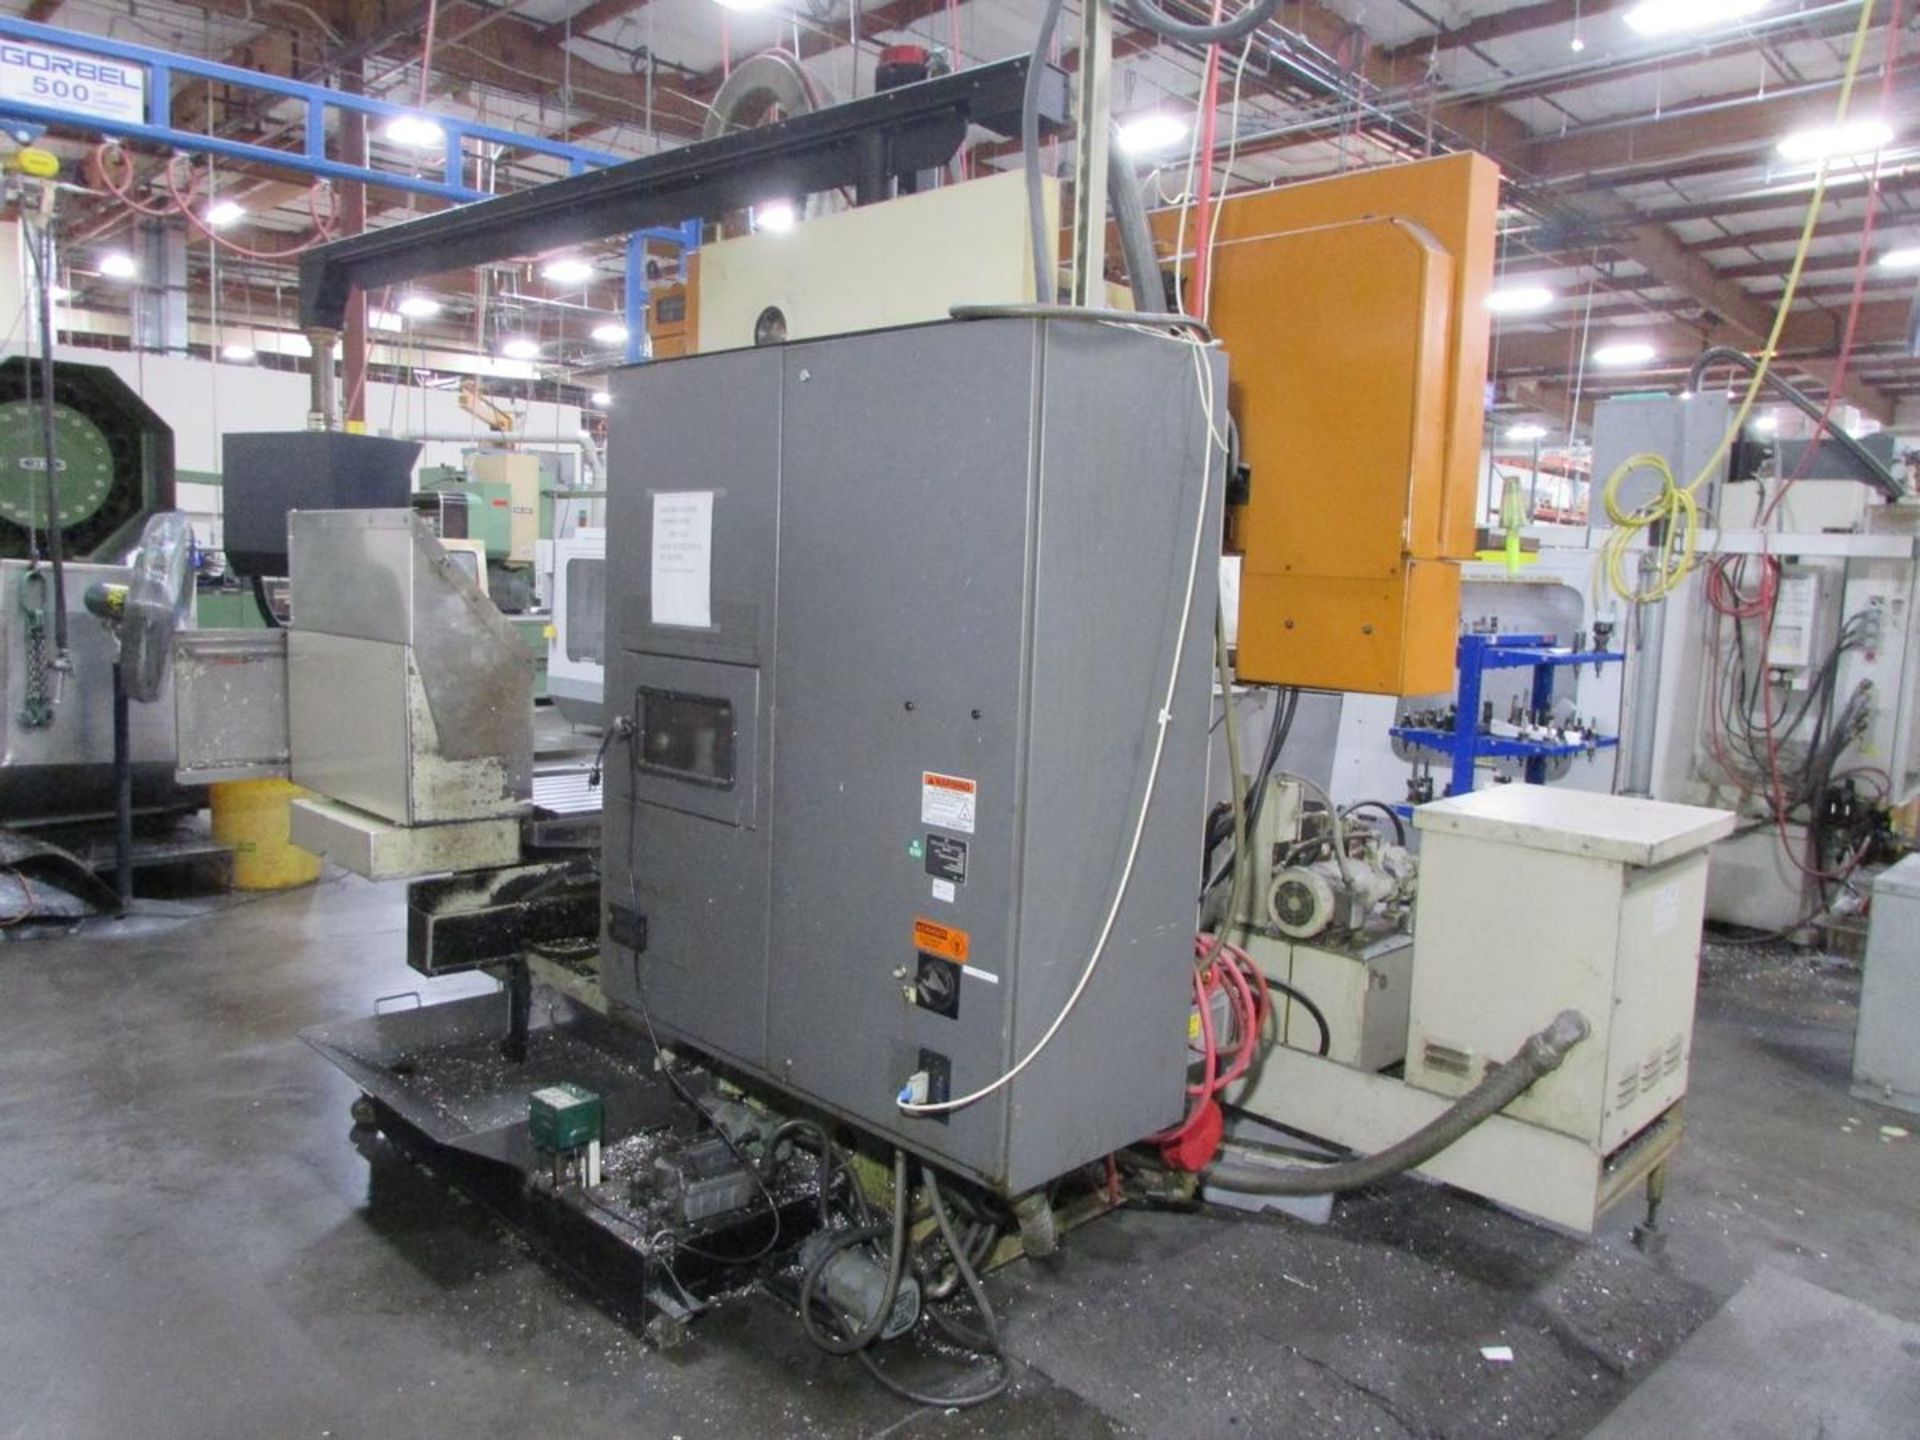 LeBlond Makino FNC106-A30 3-Axis CNC Vertical Maching Center - Image 16 of 25